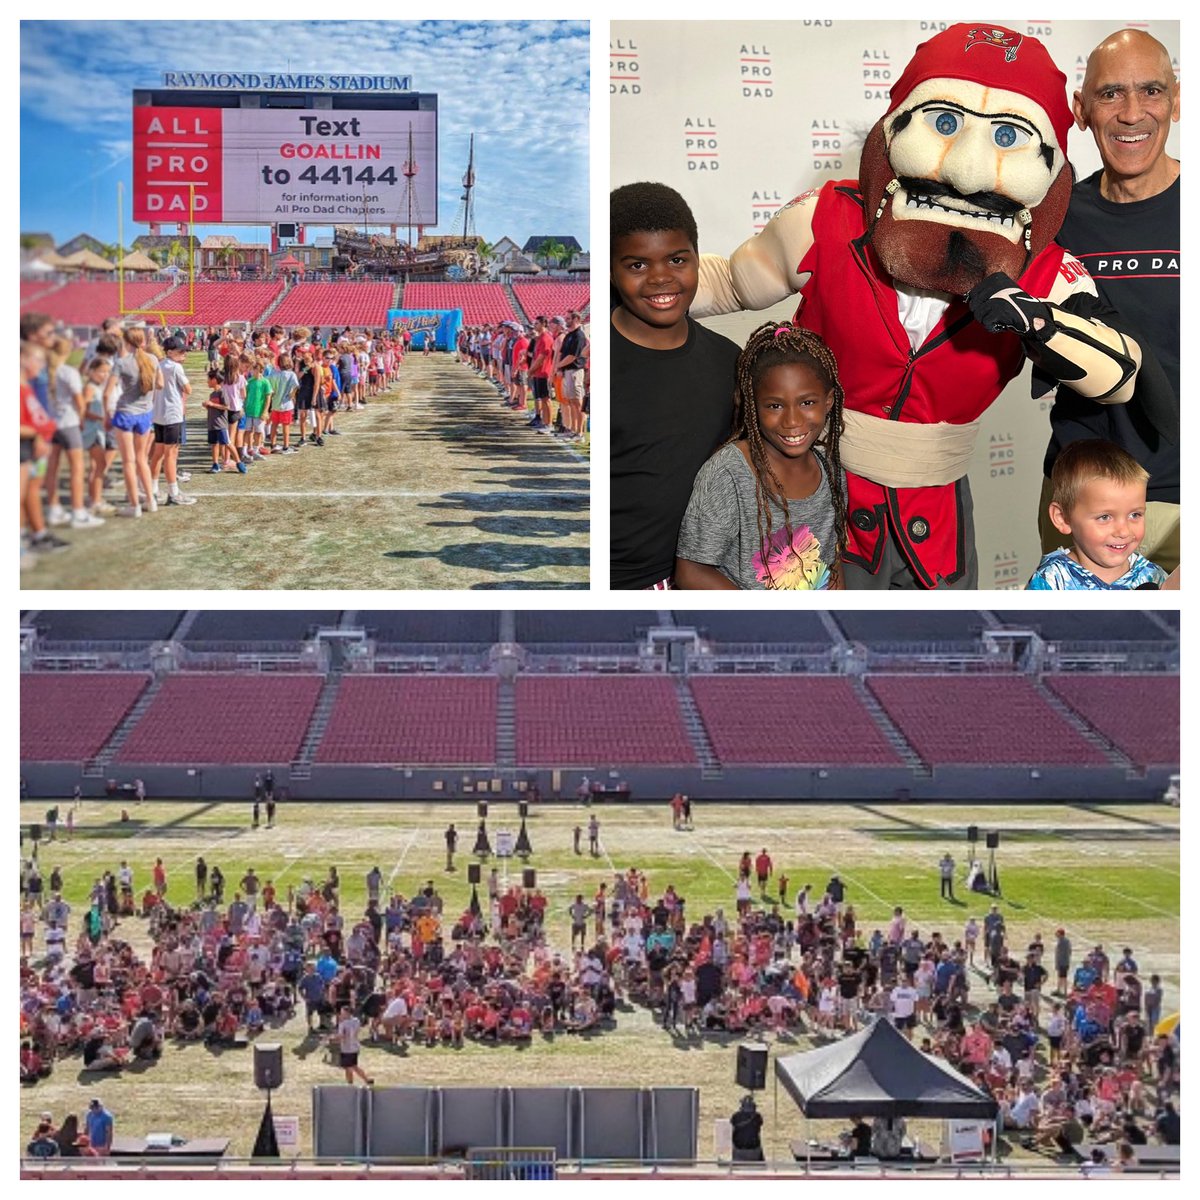 We are at Raymond James Stadium at the @AllProDad Father and Kids Experience. It’s our 130th stadium event and it’s great to see so many dads out with their children. My kids got a special treat—they got to play with Captain Fear😀